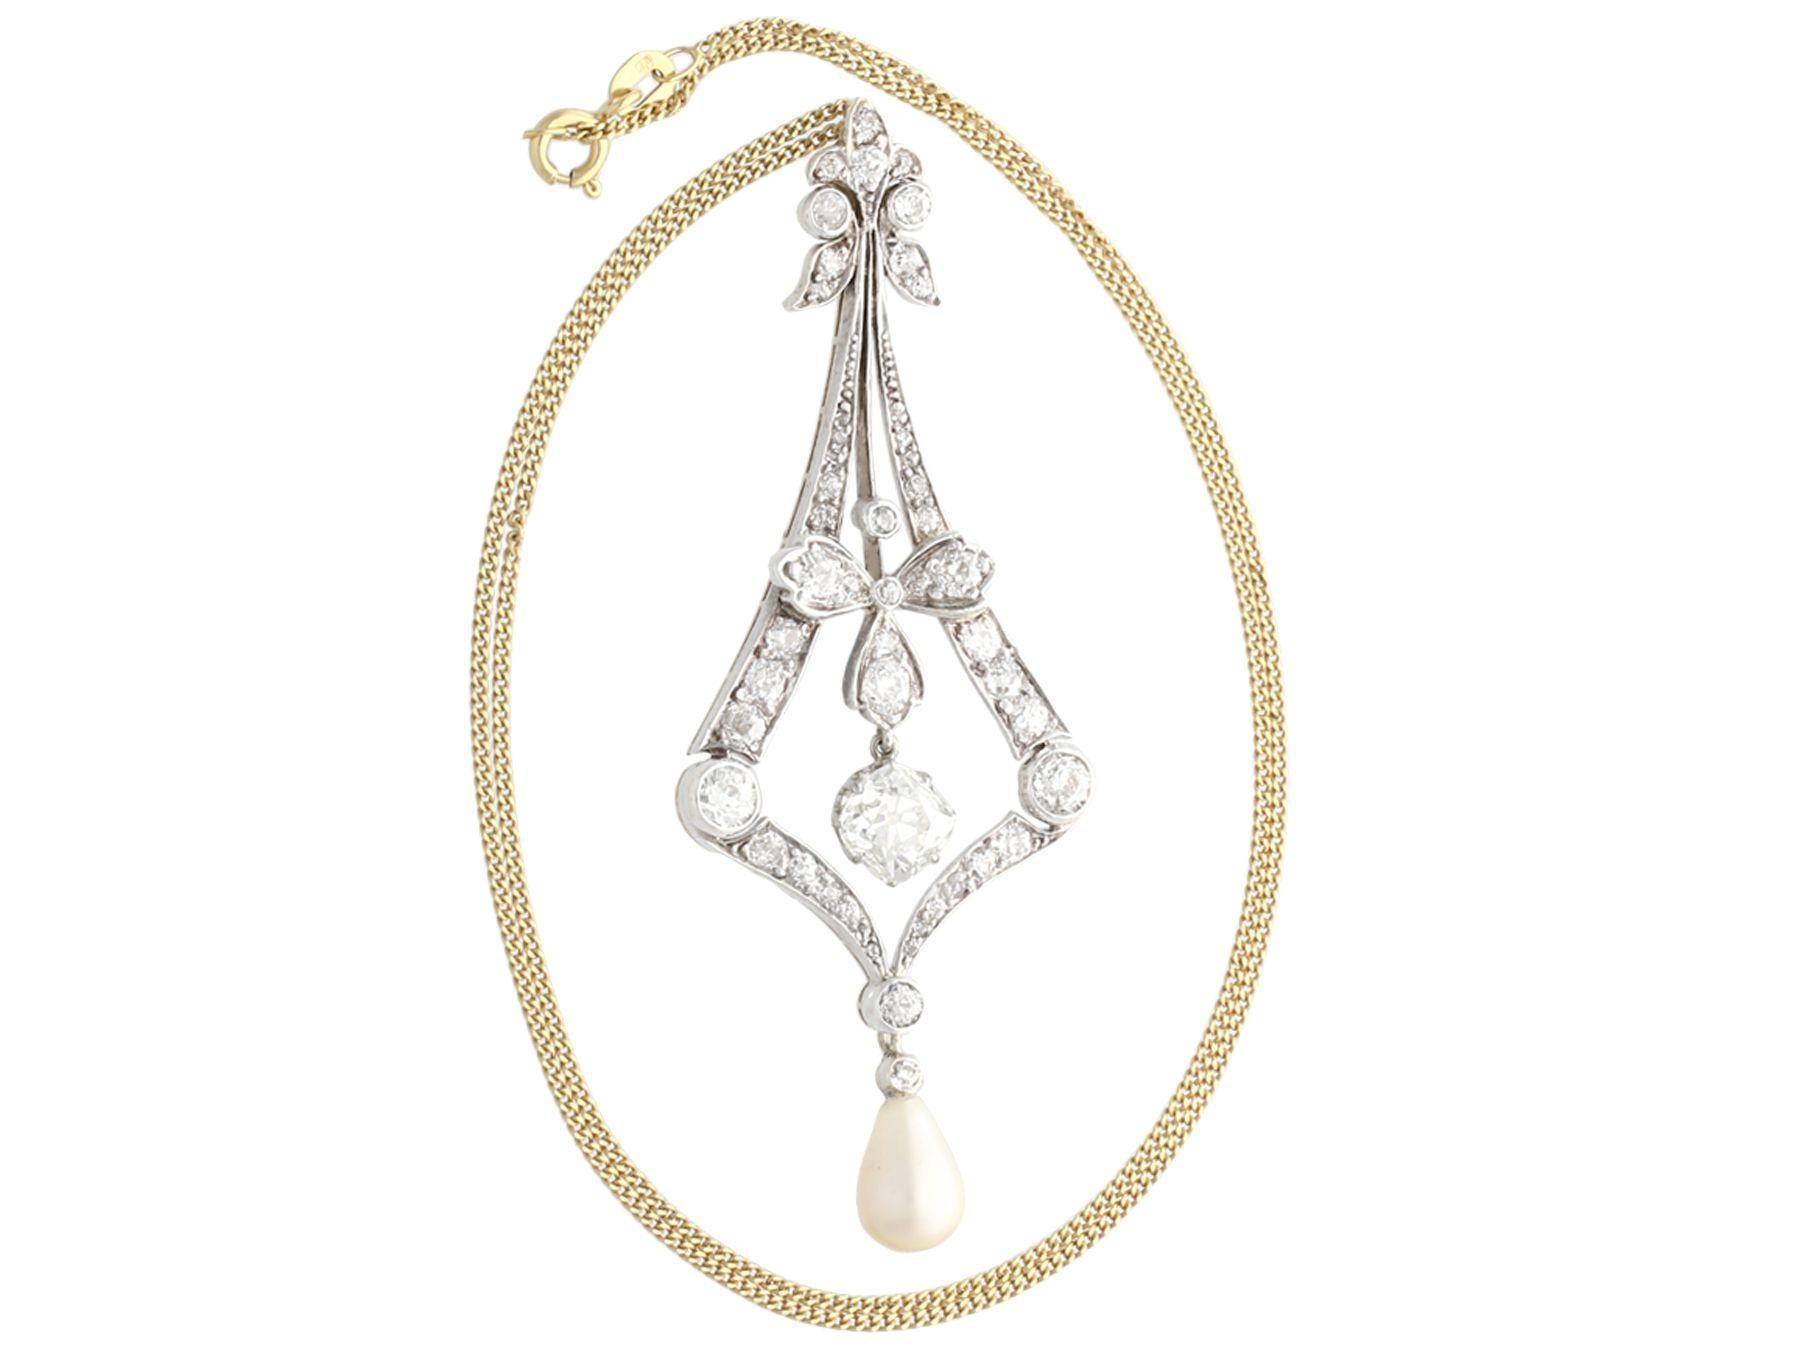 A stunning antique 1900s natural saltwater pearl and 3.99 carat diamond, 18k yellow gold and silver set pendant; part of our diverse antique jewelry and estate jewelry collections.

This stunning, fine and impressive antique pendant has been crafted